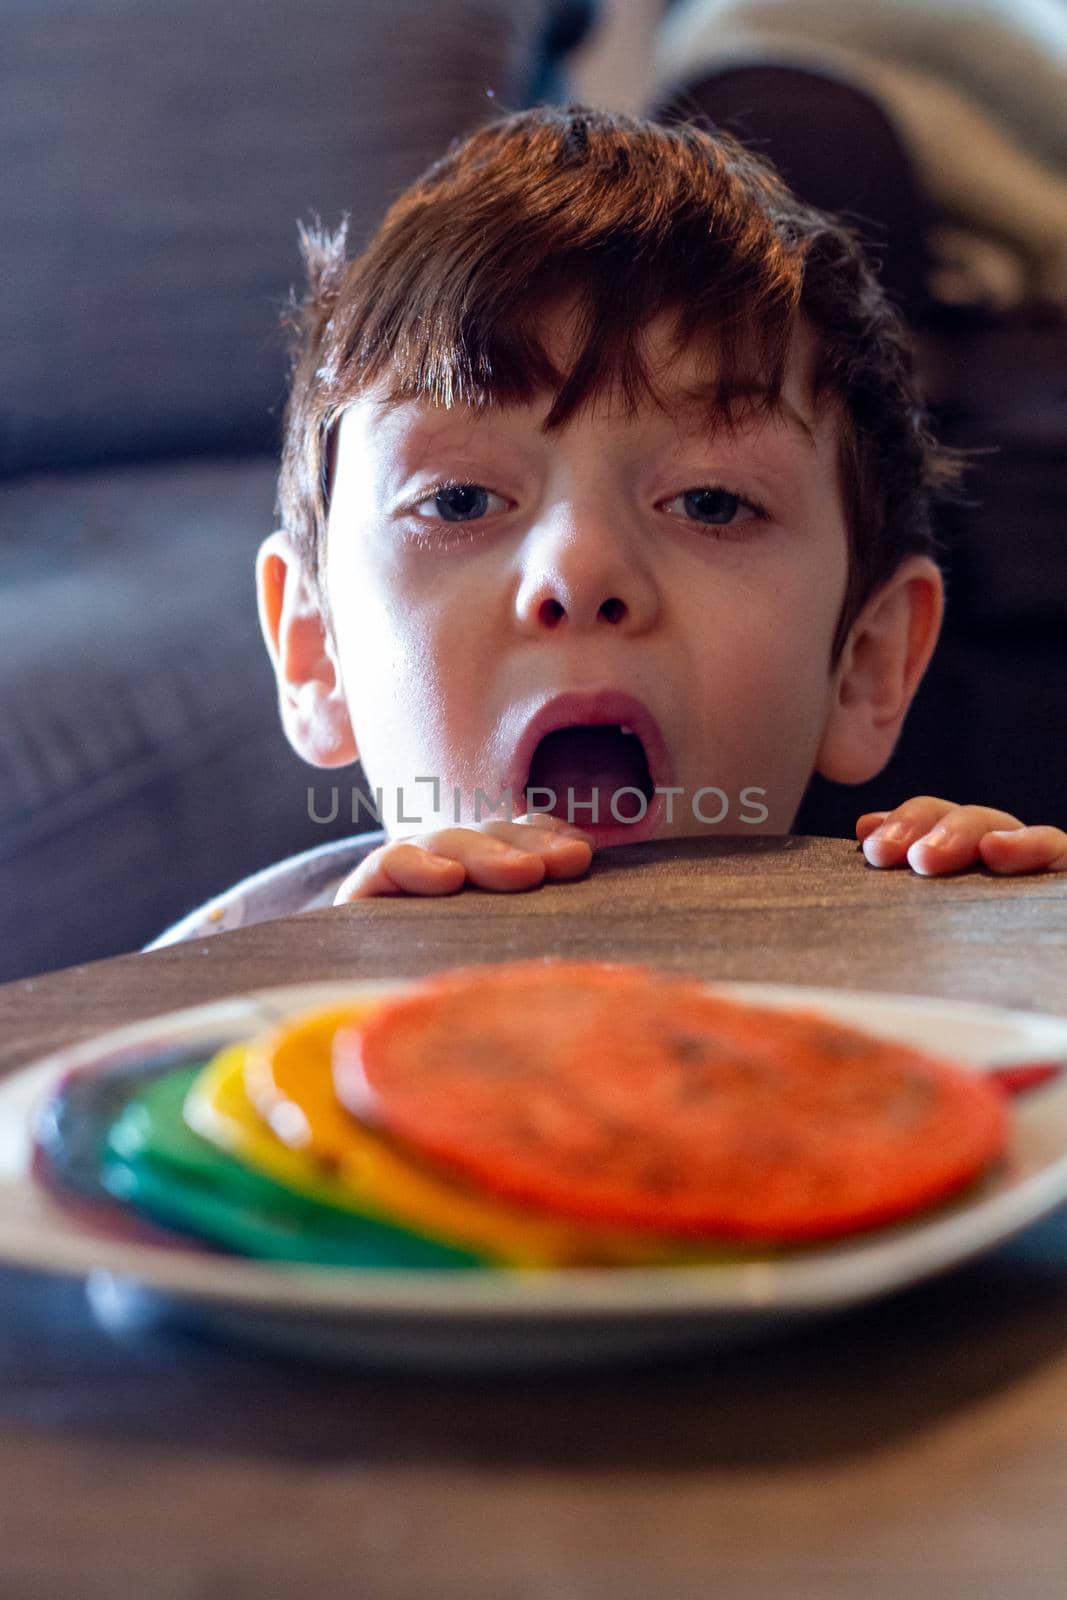 A cute blue-eyed boy looking at a plate of colorful pancakes with his mouth open